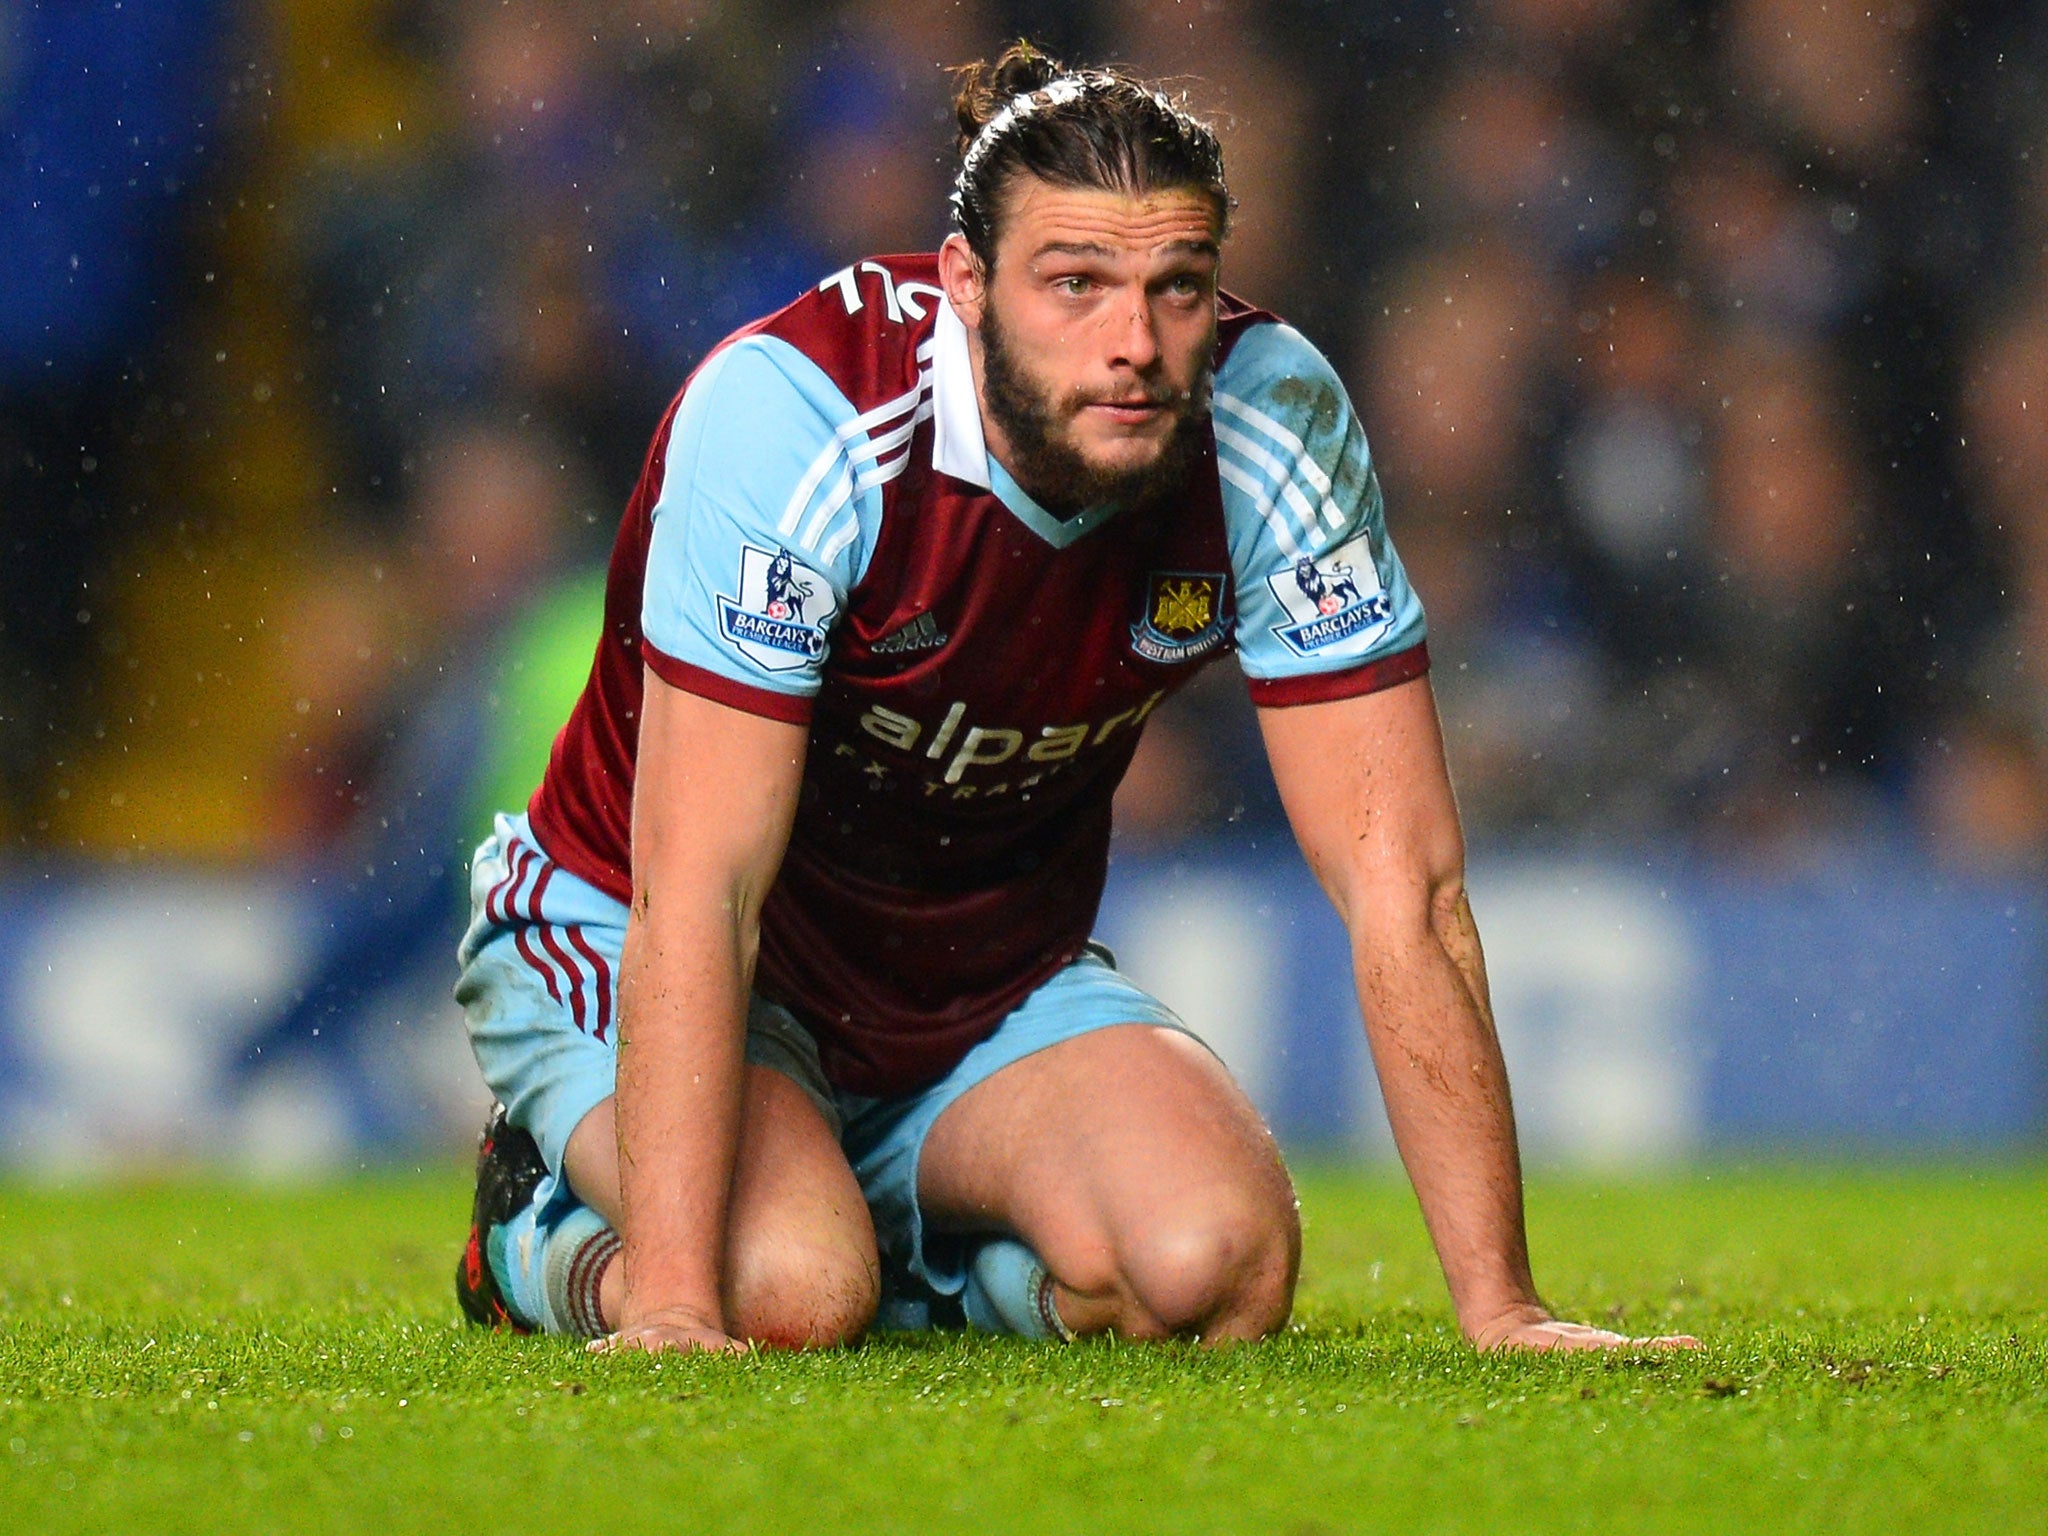 West Ham striker Andy Carroll has been left out of the England squad